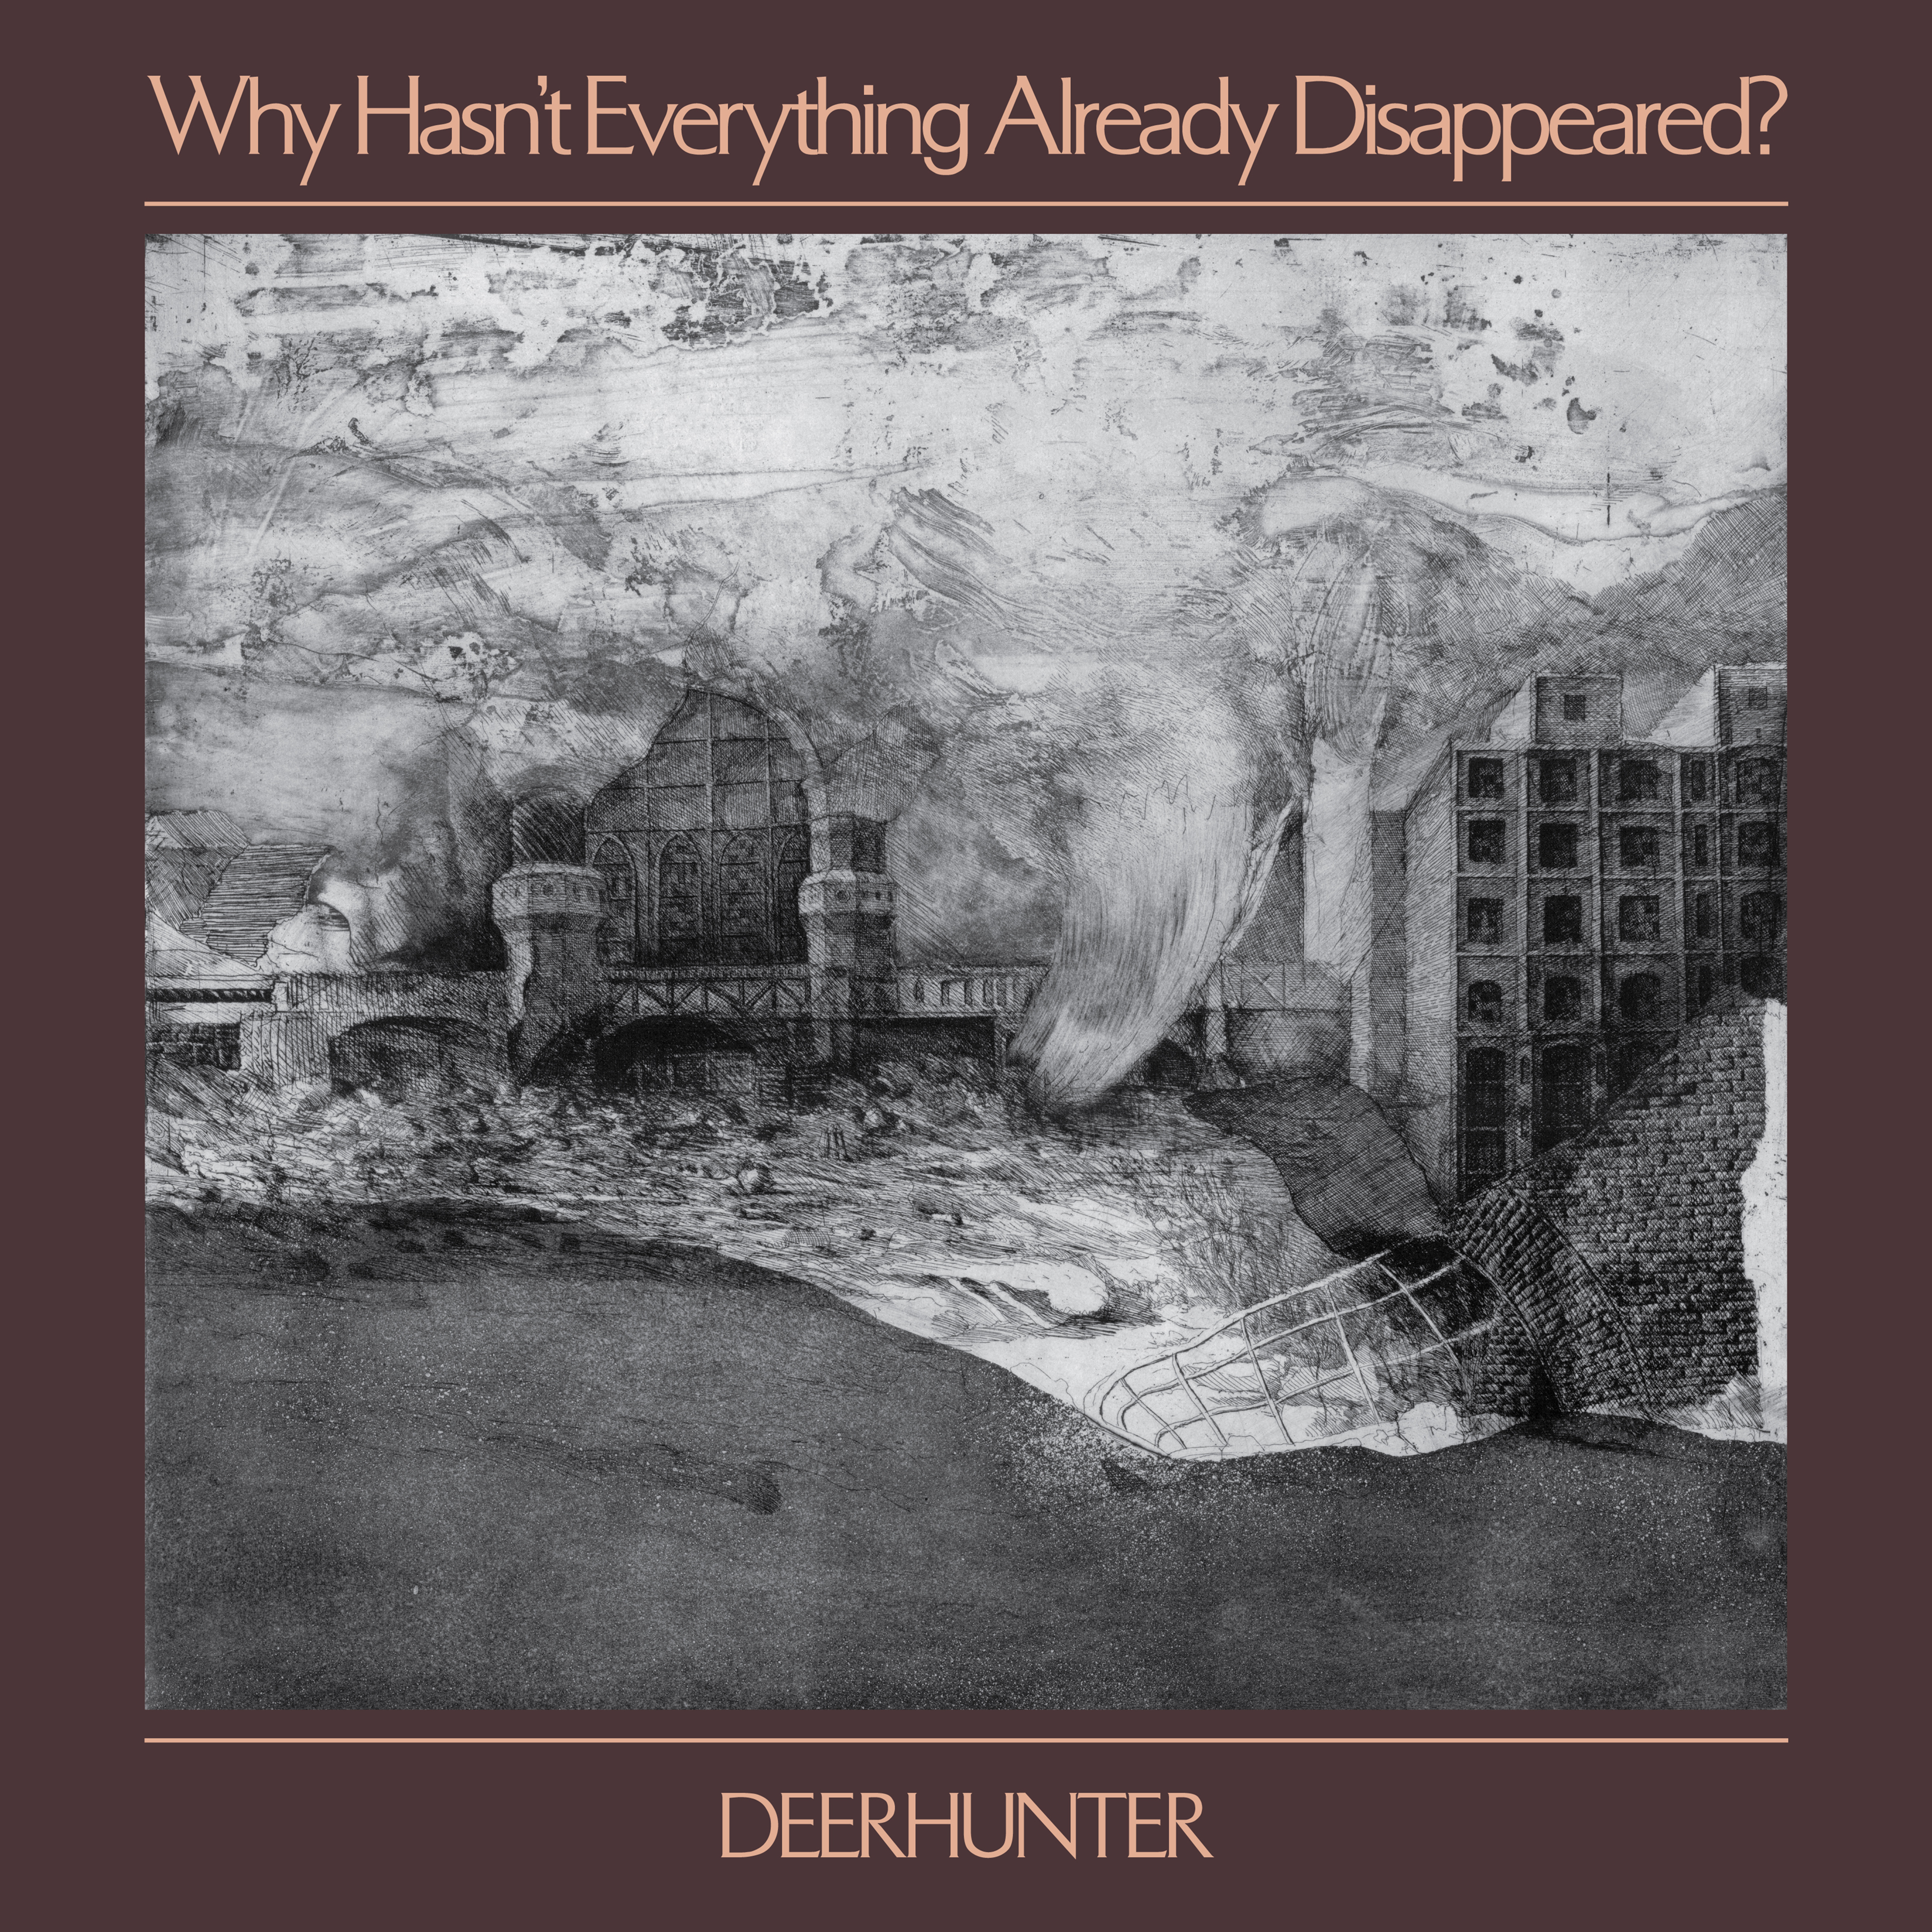 Deerhunter Announce New Album <i>Why Hasn’t Everything Already Disappeared?</i>, Release Video for “Death in Midsummer”” title=”Deerhunter” data-original-id=”308881″ data-adjusted-id=”308881″ class=”sm_size_full_width sm_alignment_center ” />
<p>11/4 SAO PAOLO, Balaclava Festival<br />
11/8 SANTIAGO, Blondie<br />
11/10 SANTIAGO, Fauna Primavera<br />
11/11 BUENOS AIRES, Personal Fest<br />
11/13 QUITO, La Ideal<br />
11/14 LIMA, Sala Raimondi<br />
1/17 LOS ANGELES, CA Lodge Room (with Confusing Mix of Nations)<br />
1/21 OSAKA, Bigcat (with Gang Gang Dance)<br />
1/22 NAGOYA, Electric Ladyland<br />
1/23 TOKYO, O-East<br />
2/15 NASHVILLE, TN Cannery Ballroom (with Faye Webster)<br />
2/18 CLEVELAND, OH Mahall’s 20 Lanes (with Mary Lattimore)<br />
2/19 DETROIT, MI El Club (with Mary Lattimore)<br />
2/21 TORONTO, ON Danforth Music Hall (with Mary Lattimore)<br />
2/22 MONTREAL, QC Le National (with Mary Lattimore)<br />
2/23 NEW HAVEN, CT College Street Music Hall (with Mary Lattimore)<br />
2/24 BOSTON, MA Royale (with Mary Lattimore)<br />
2/27 BROOKLYN, NY Brooklyn Steel (with Mary Lattimore, L’Rain)<br />
3/1 PHILADELPHIA, PA Union Transfer (with L’Rain)<br />
3/2 WASHINGTON DC 9:30 Club (with L’Rain)<br />
3/3 BALTIMORE, MD Ottobar<br />
3/5 PITTSBURGH, PA Mr. Small’s Theatre (with L’Rain)<br />
3/6 LOUISVILLE, KY Headliner’s Music Hall (with L’Rain)<br />
3/8 SAVANNAH, GA Savannah Stopover Music Festival</p>
</p>		</div>
				</div>
						</div>
					</div>
		</div>
								</div>
					</div>
		</section>
				<section data-particle_enable=